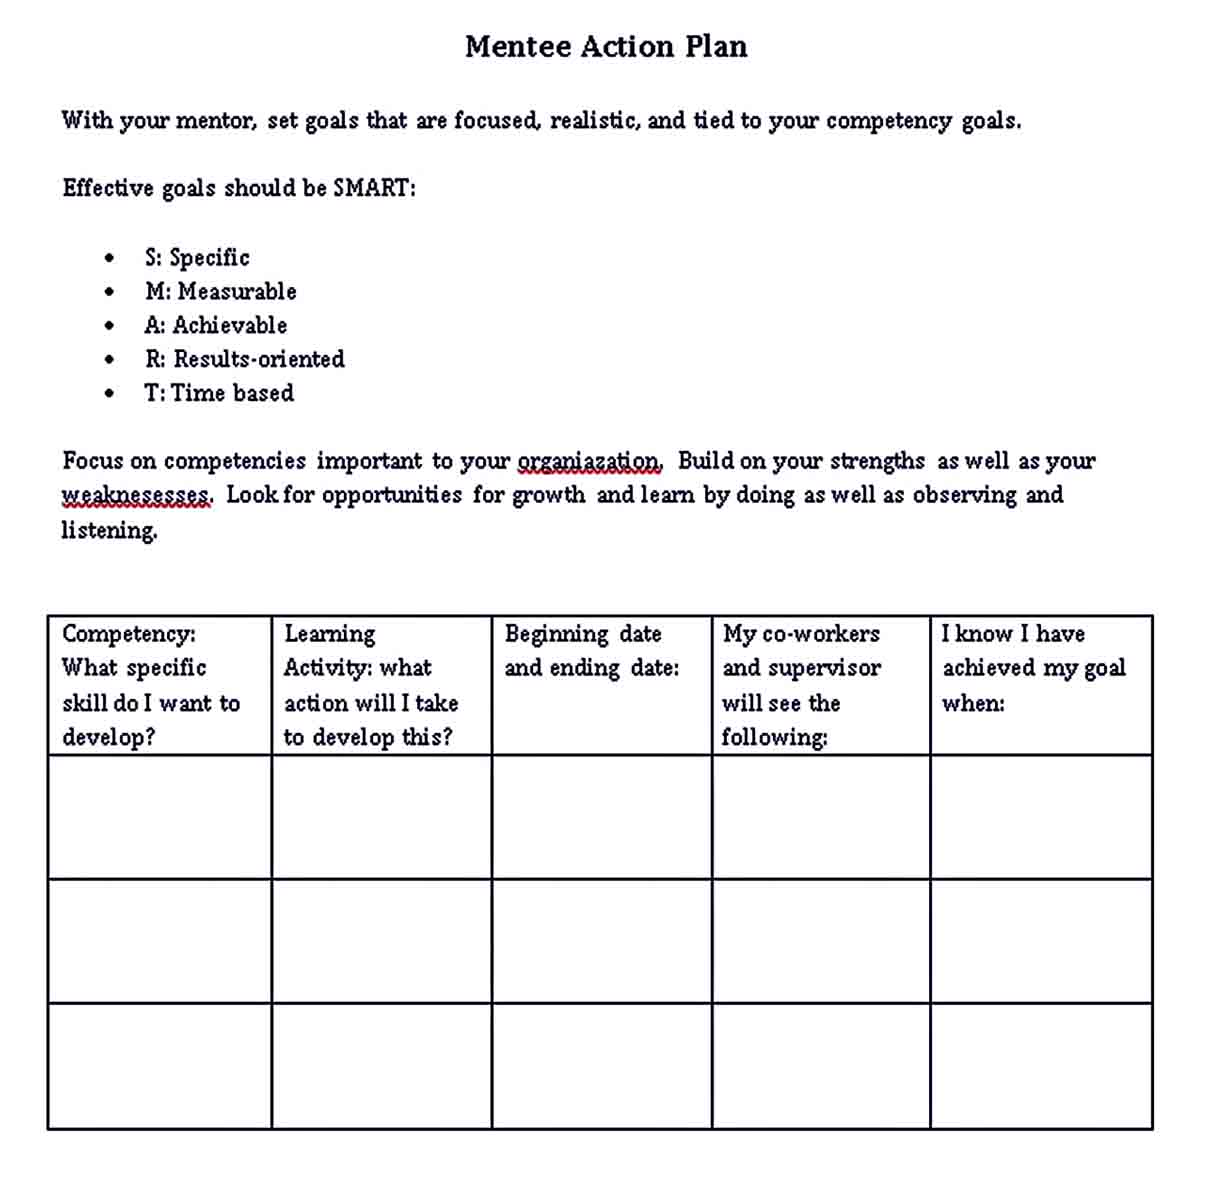 Mentoring Action Plan Templates room